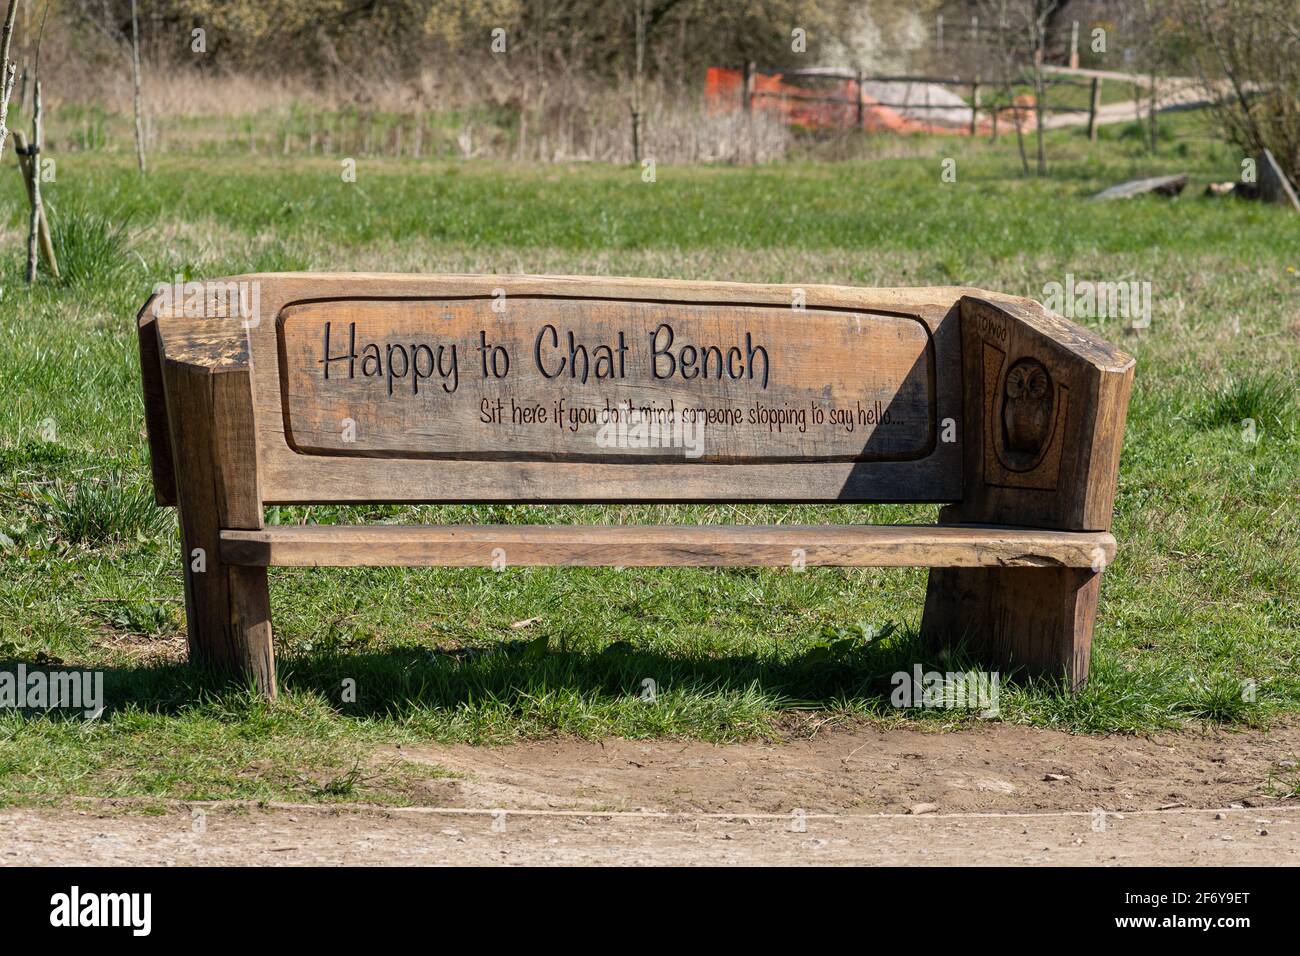 Happy to chat bench in a country park in Hampshire, UK, to help with feelings of social isolation or loneliness. Well-being concept Stock Photo